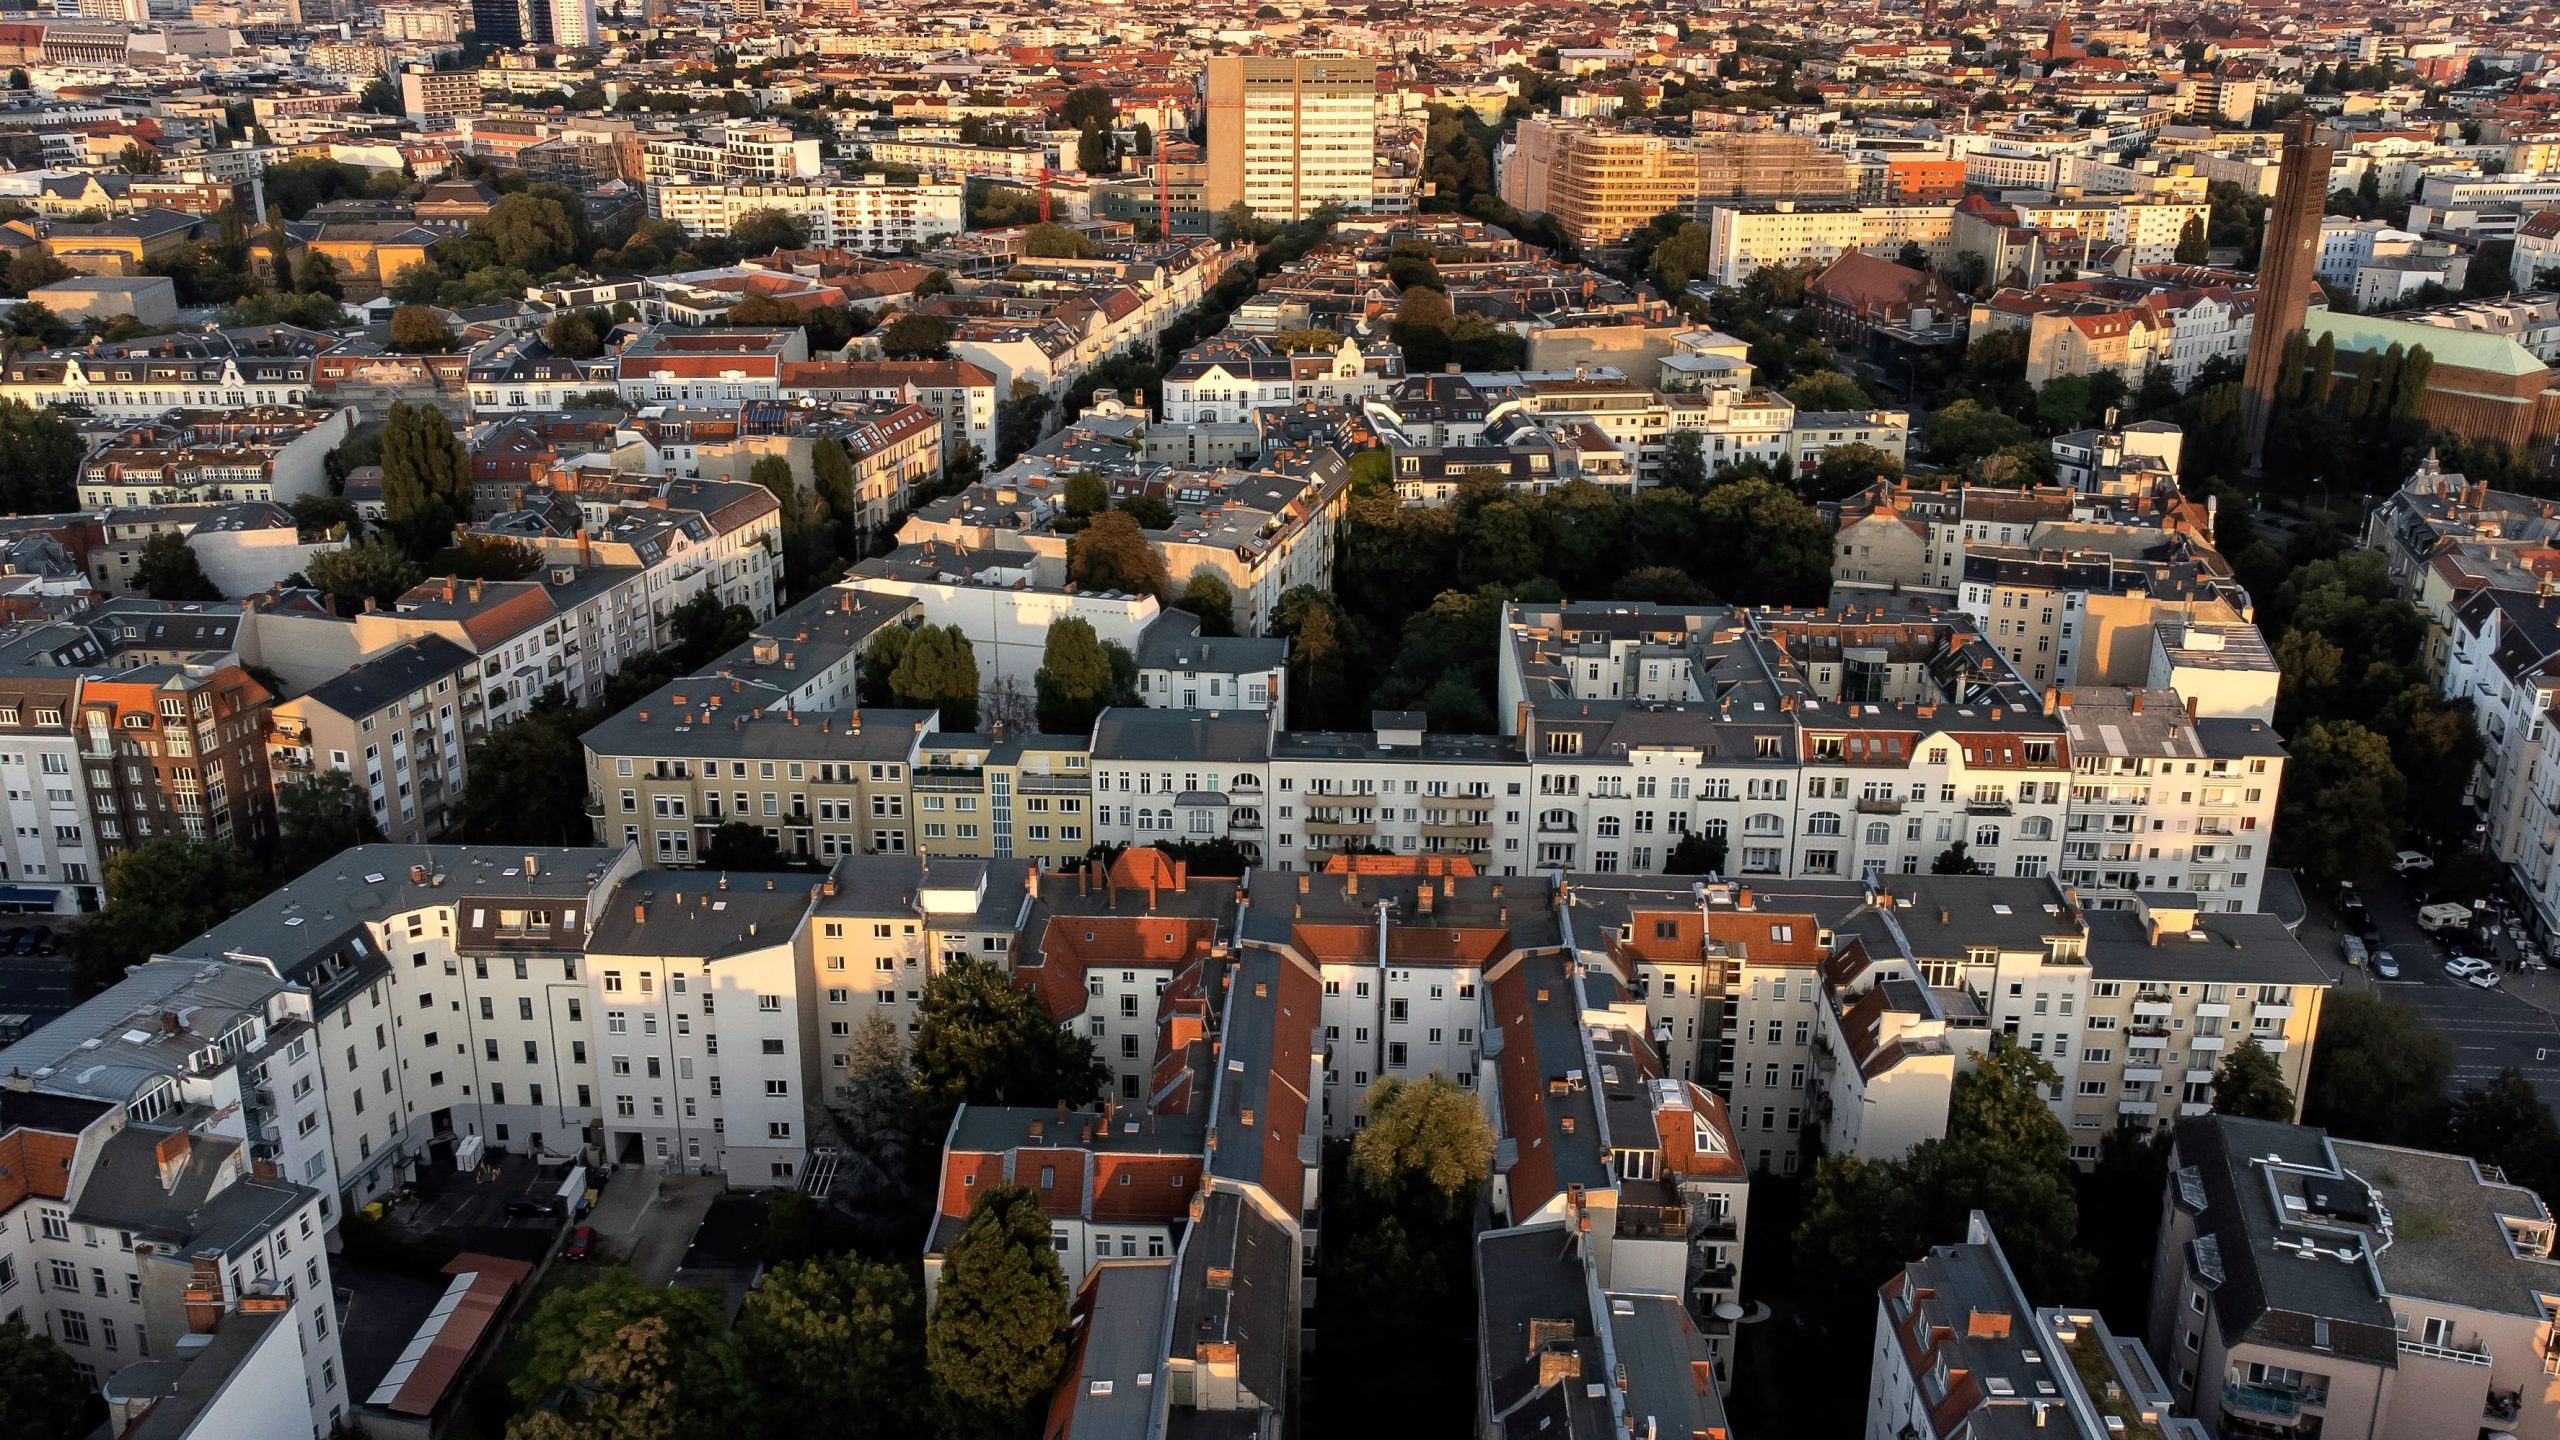 Berliners want city to takeover 240,000 corporate-owned flats to curb rents